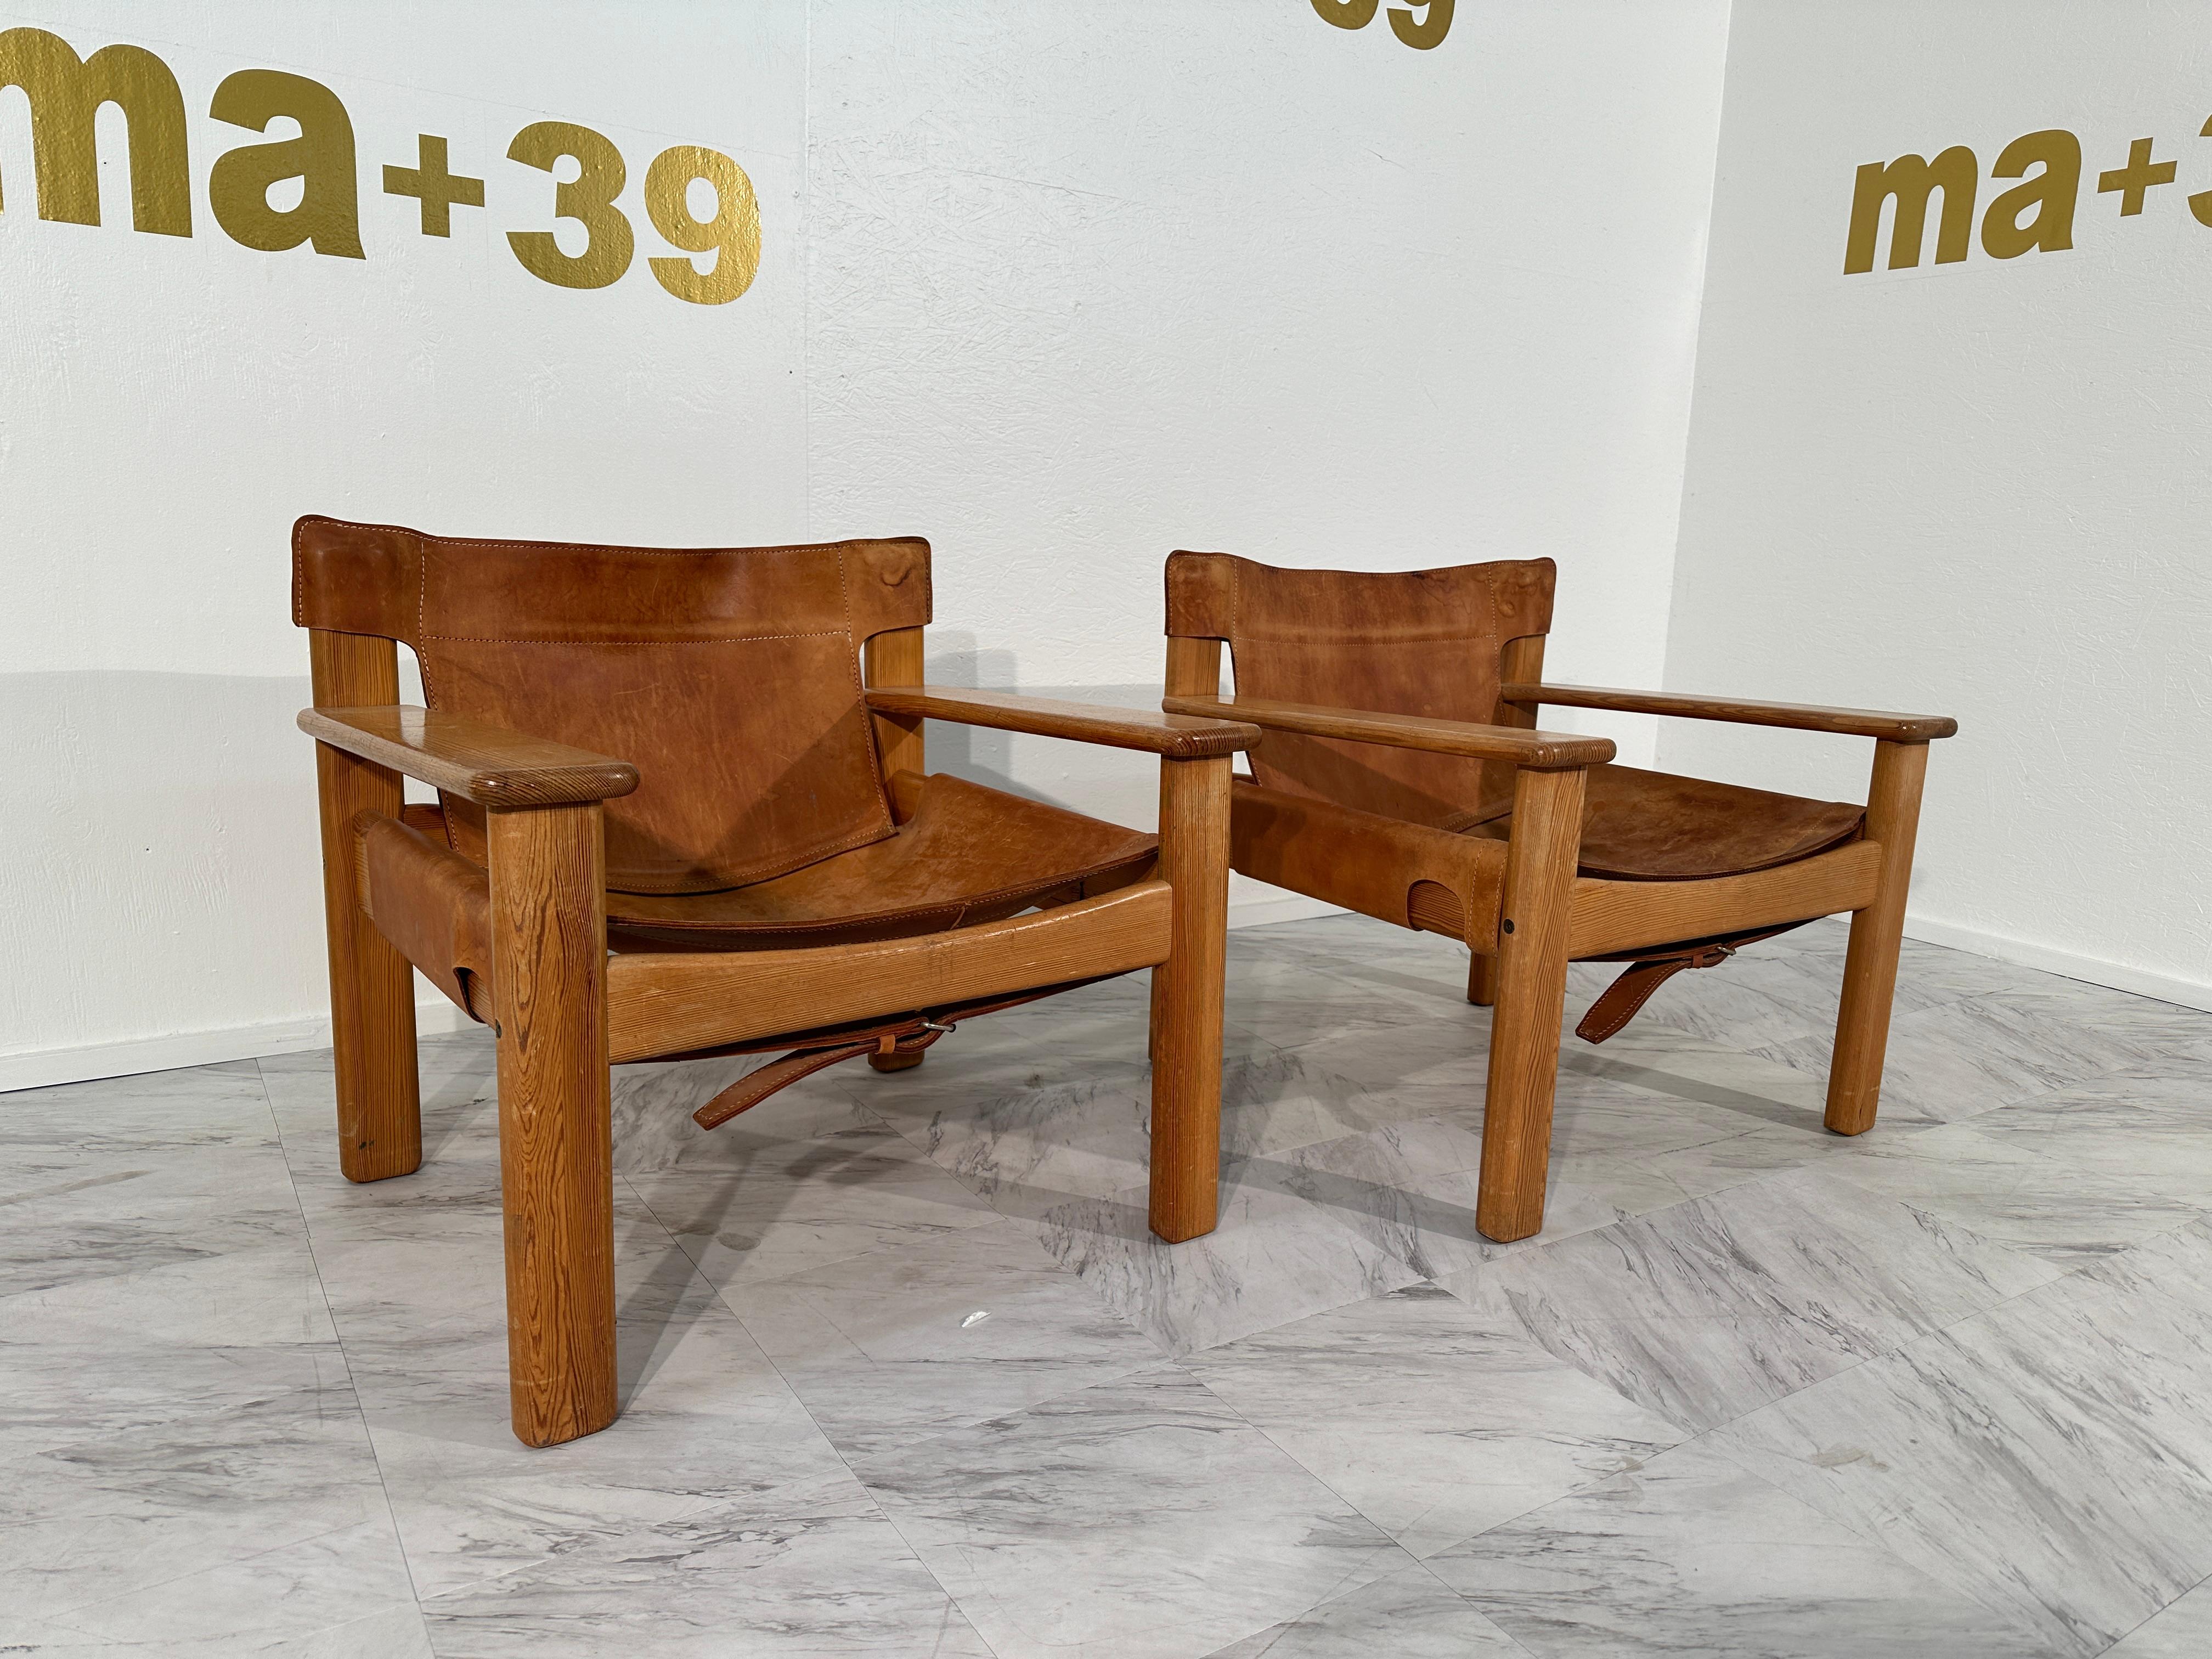 Set of 2 Vintage Italian Wood and Leather Safari Chairs 1970s For Sale 2